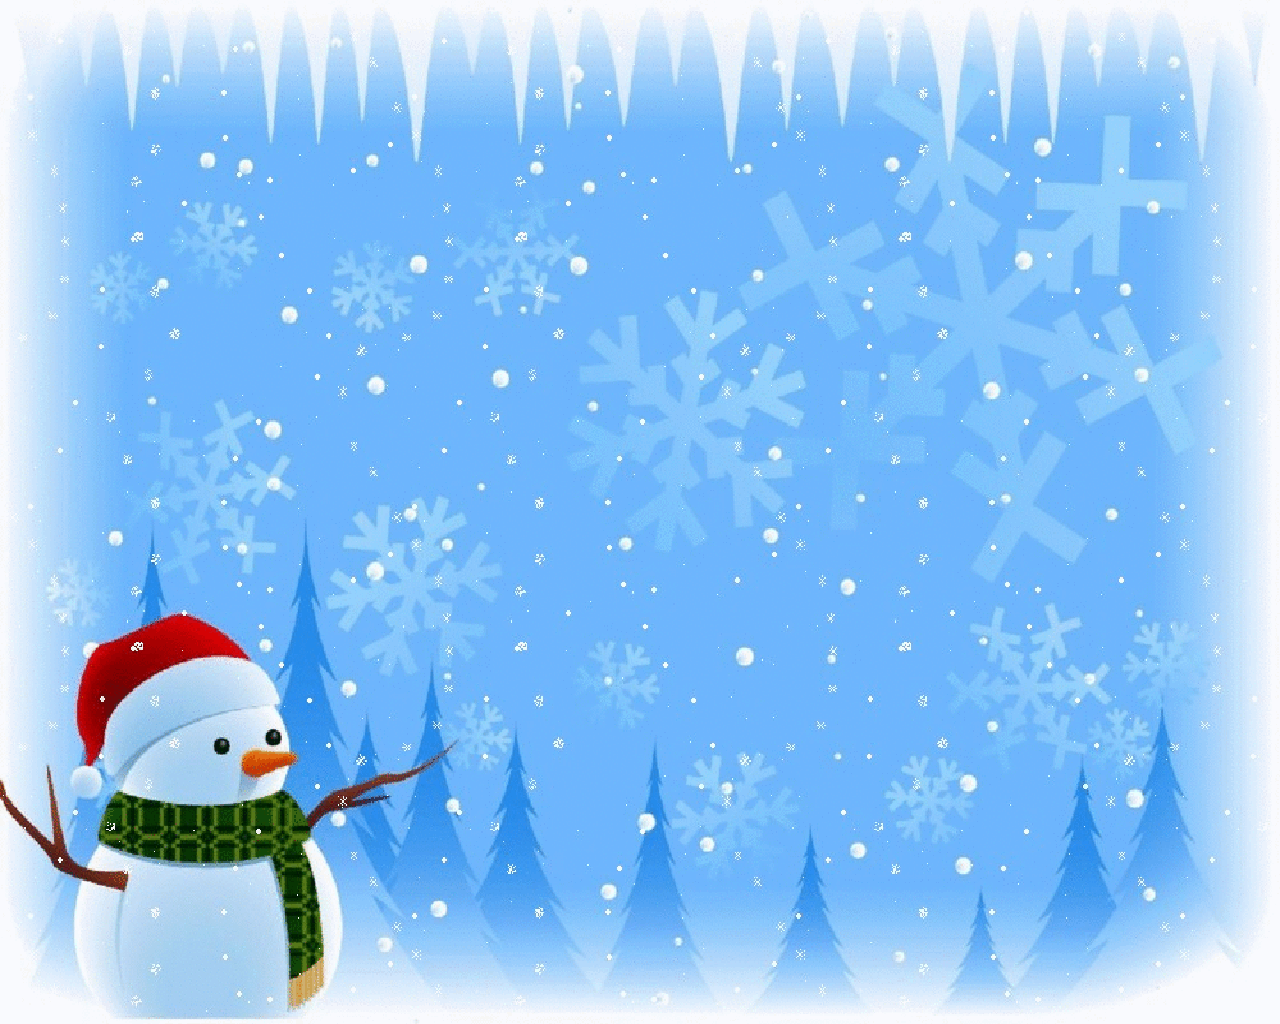 Free Dressed Up Snowman Wallpapers, Free Dressed Up Snowman HD